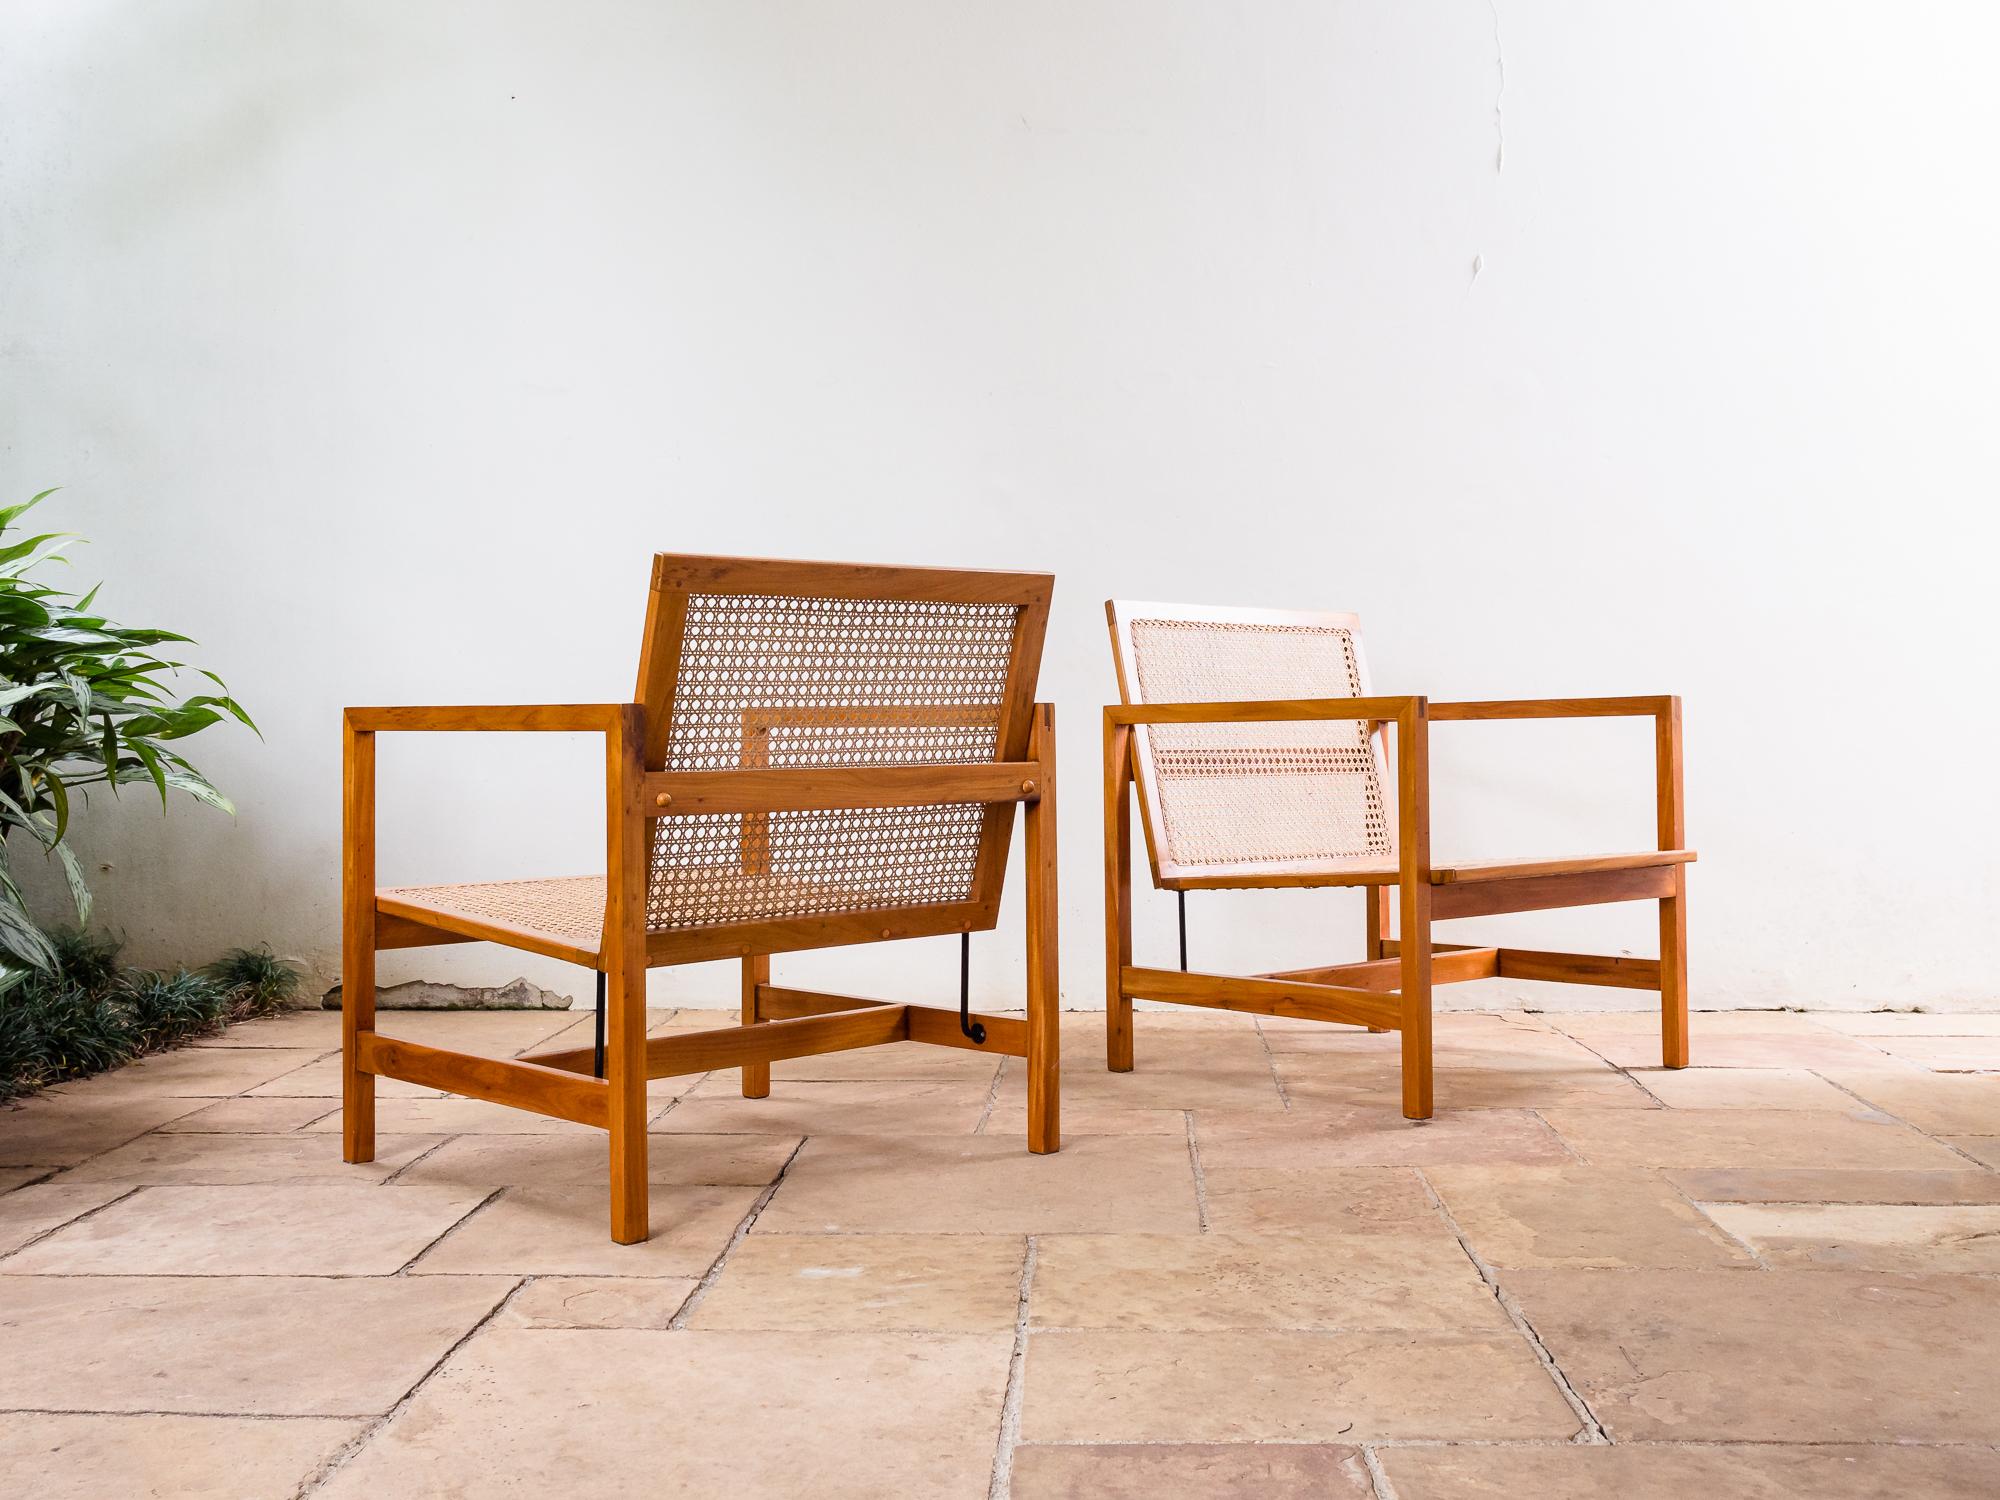 20th Century Brazilian Mid-Century Modern Lounge Chairs in Hardwood and Natural Cane